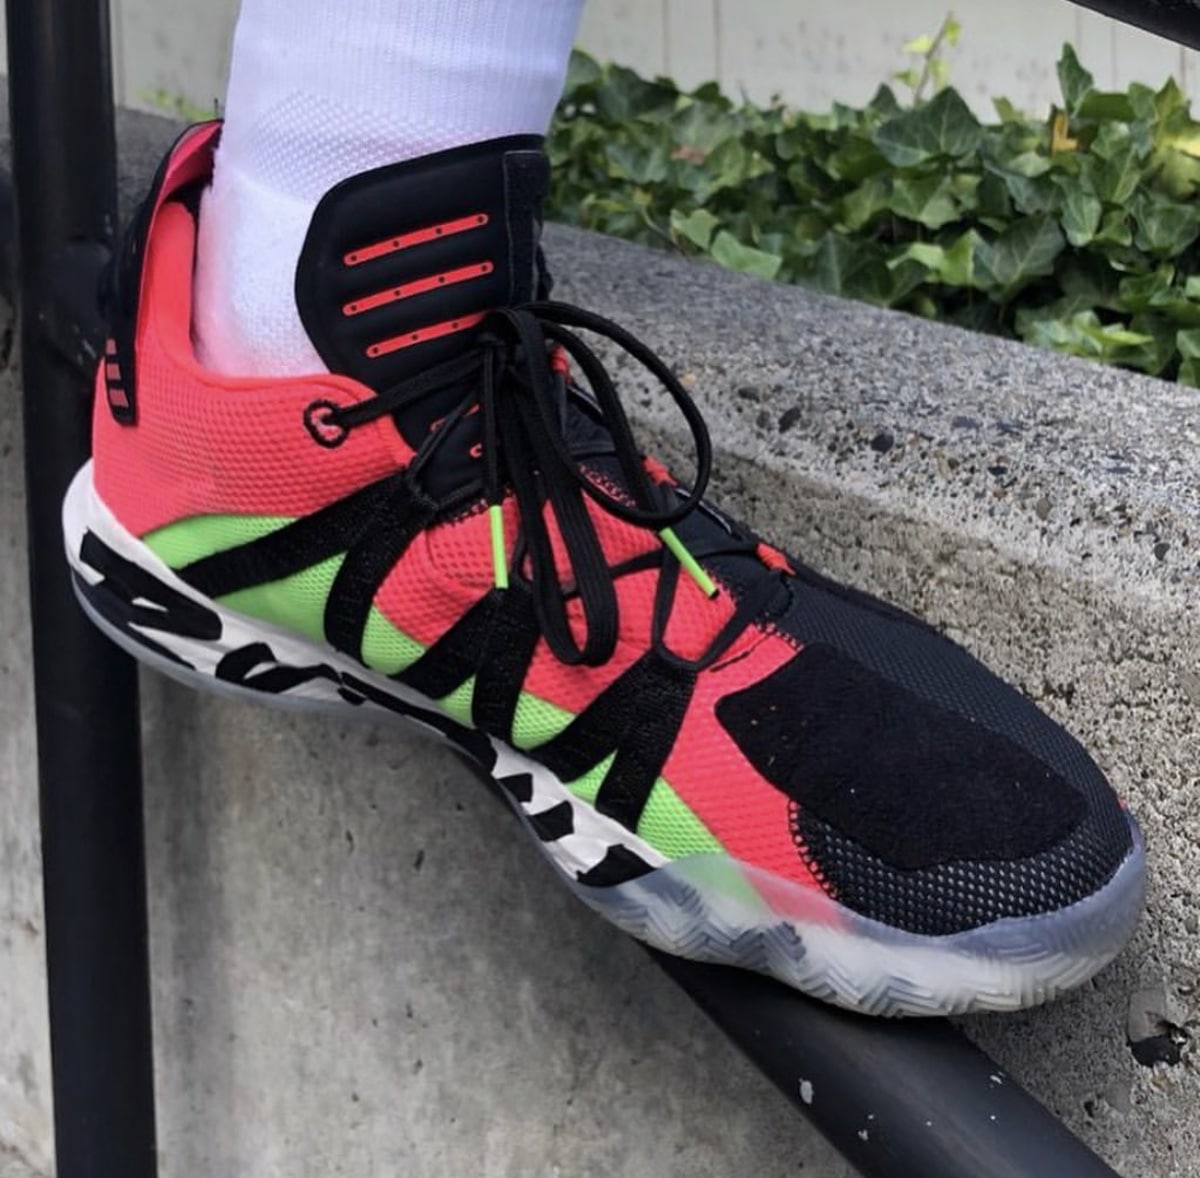 dame 6 on foot